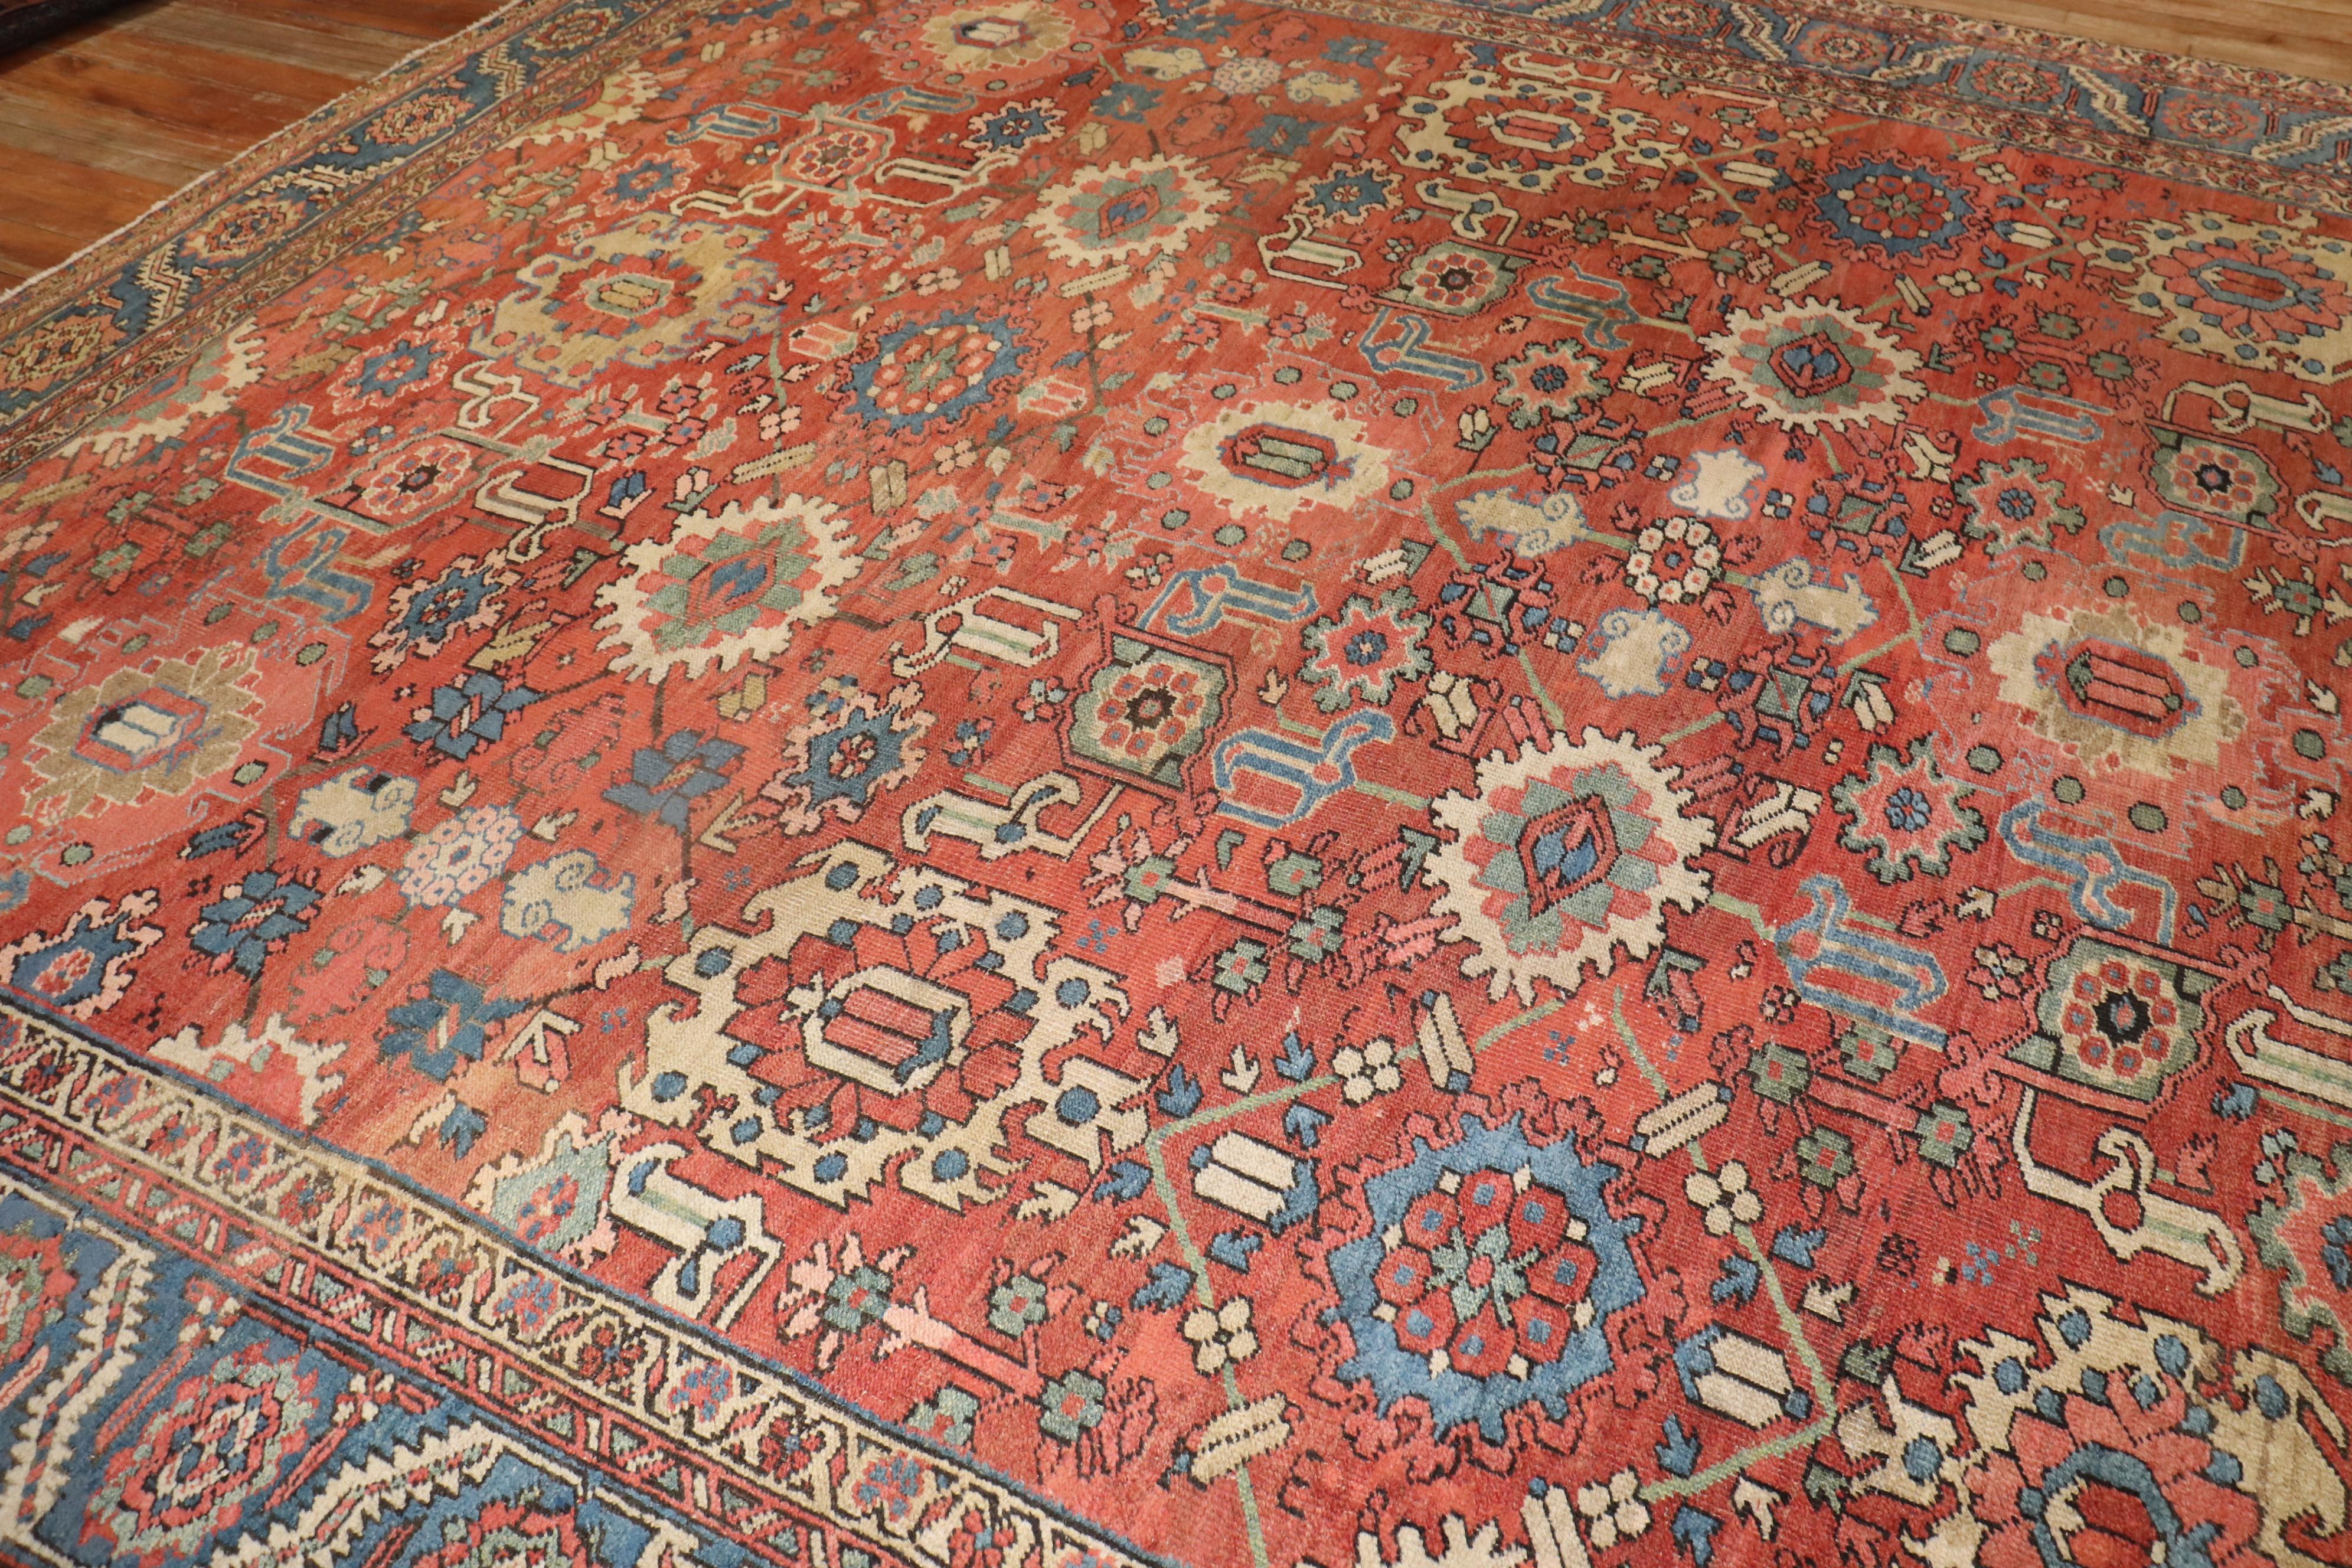 Wonderful high decorative antique Large Persian Heriz Rug from the 1st quarter of the 20th century

11'3'' x 15'6''

The finest antique Persian Heriz rugs are geometric in design with open spacious patterns invibrant colors. The great majority of